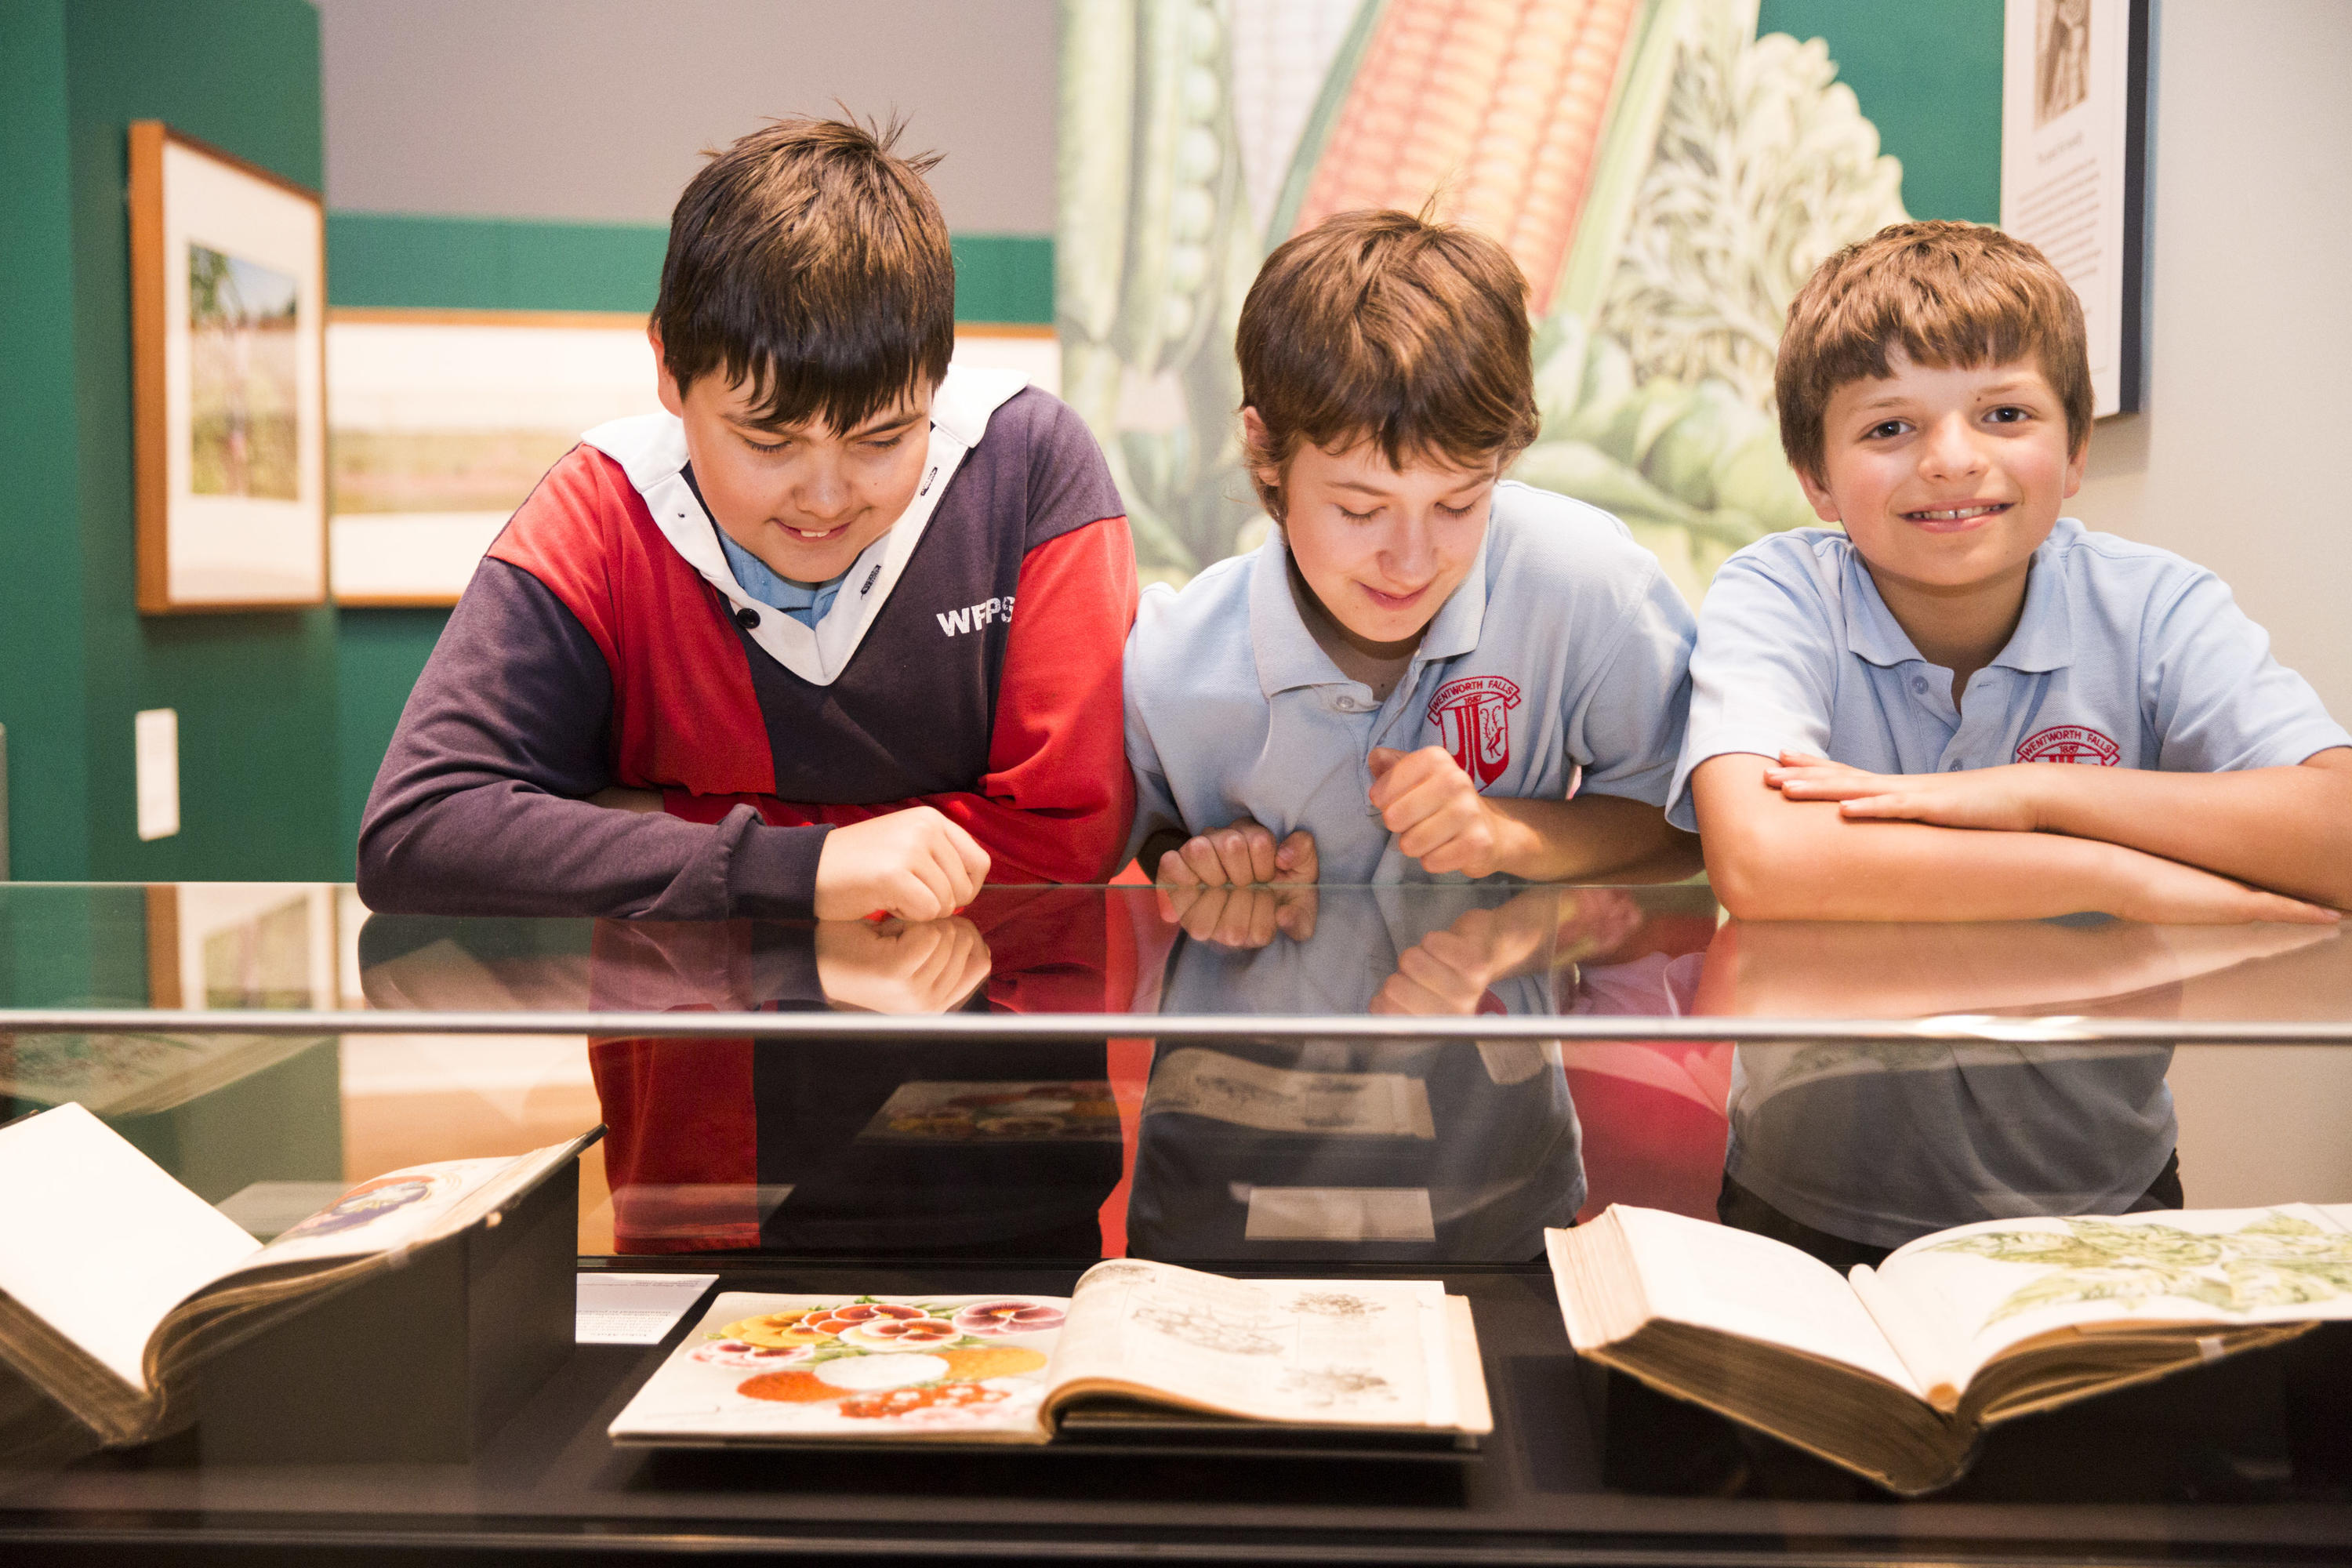 3 students looking into a showcase in an exhibition